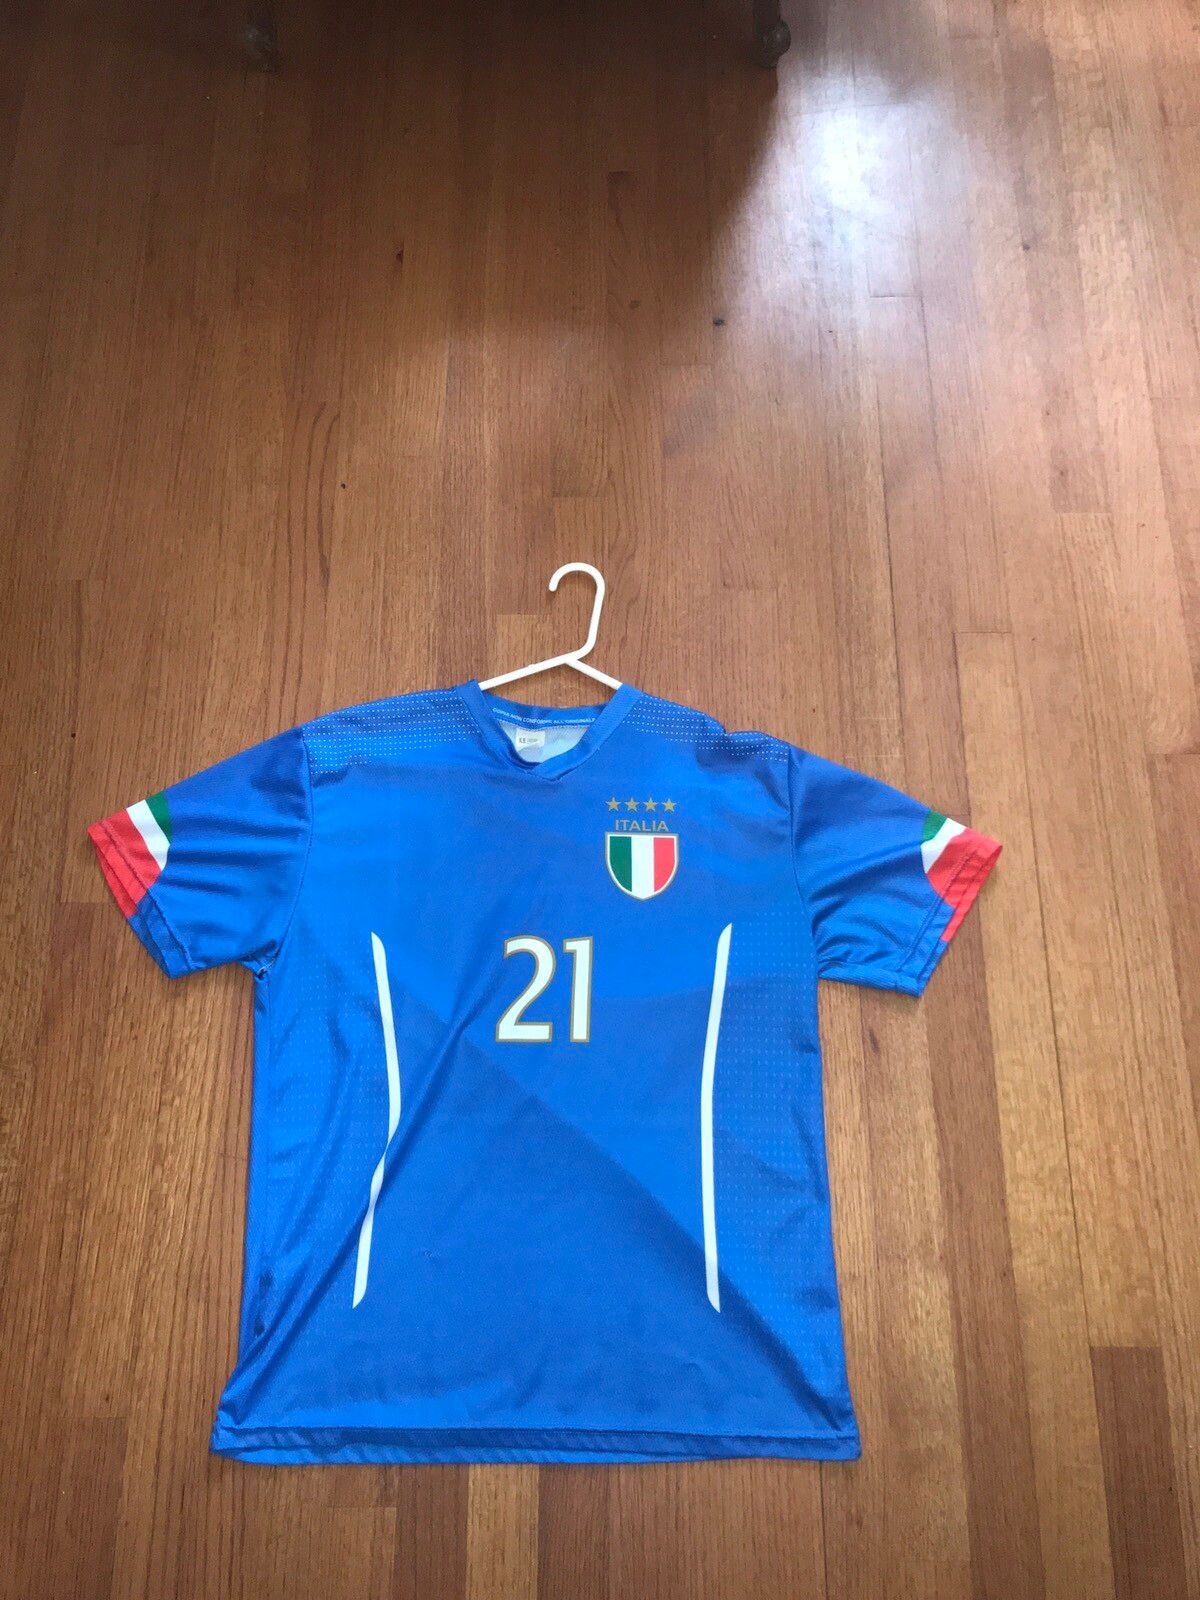 Soccer Jersey Italy soccer jersey Size US M / EU 48-50 / 2 - 1 Preview